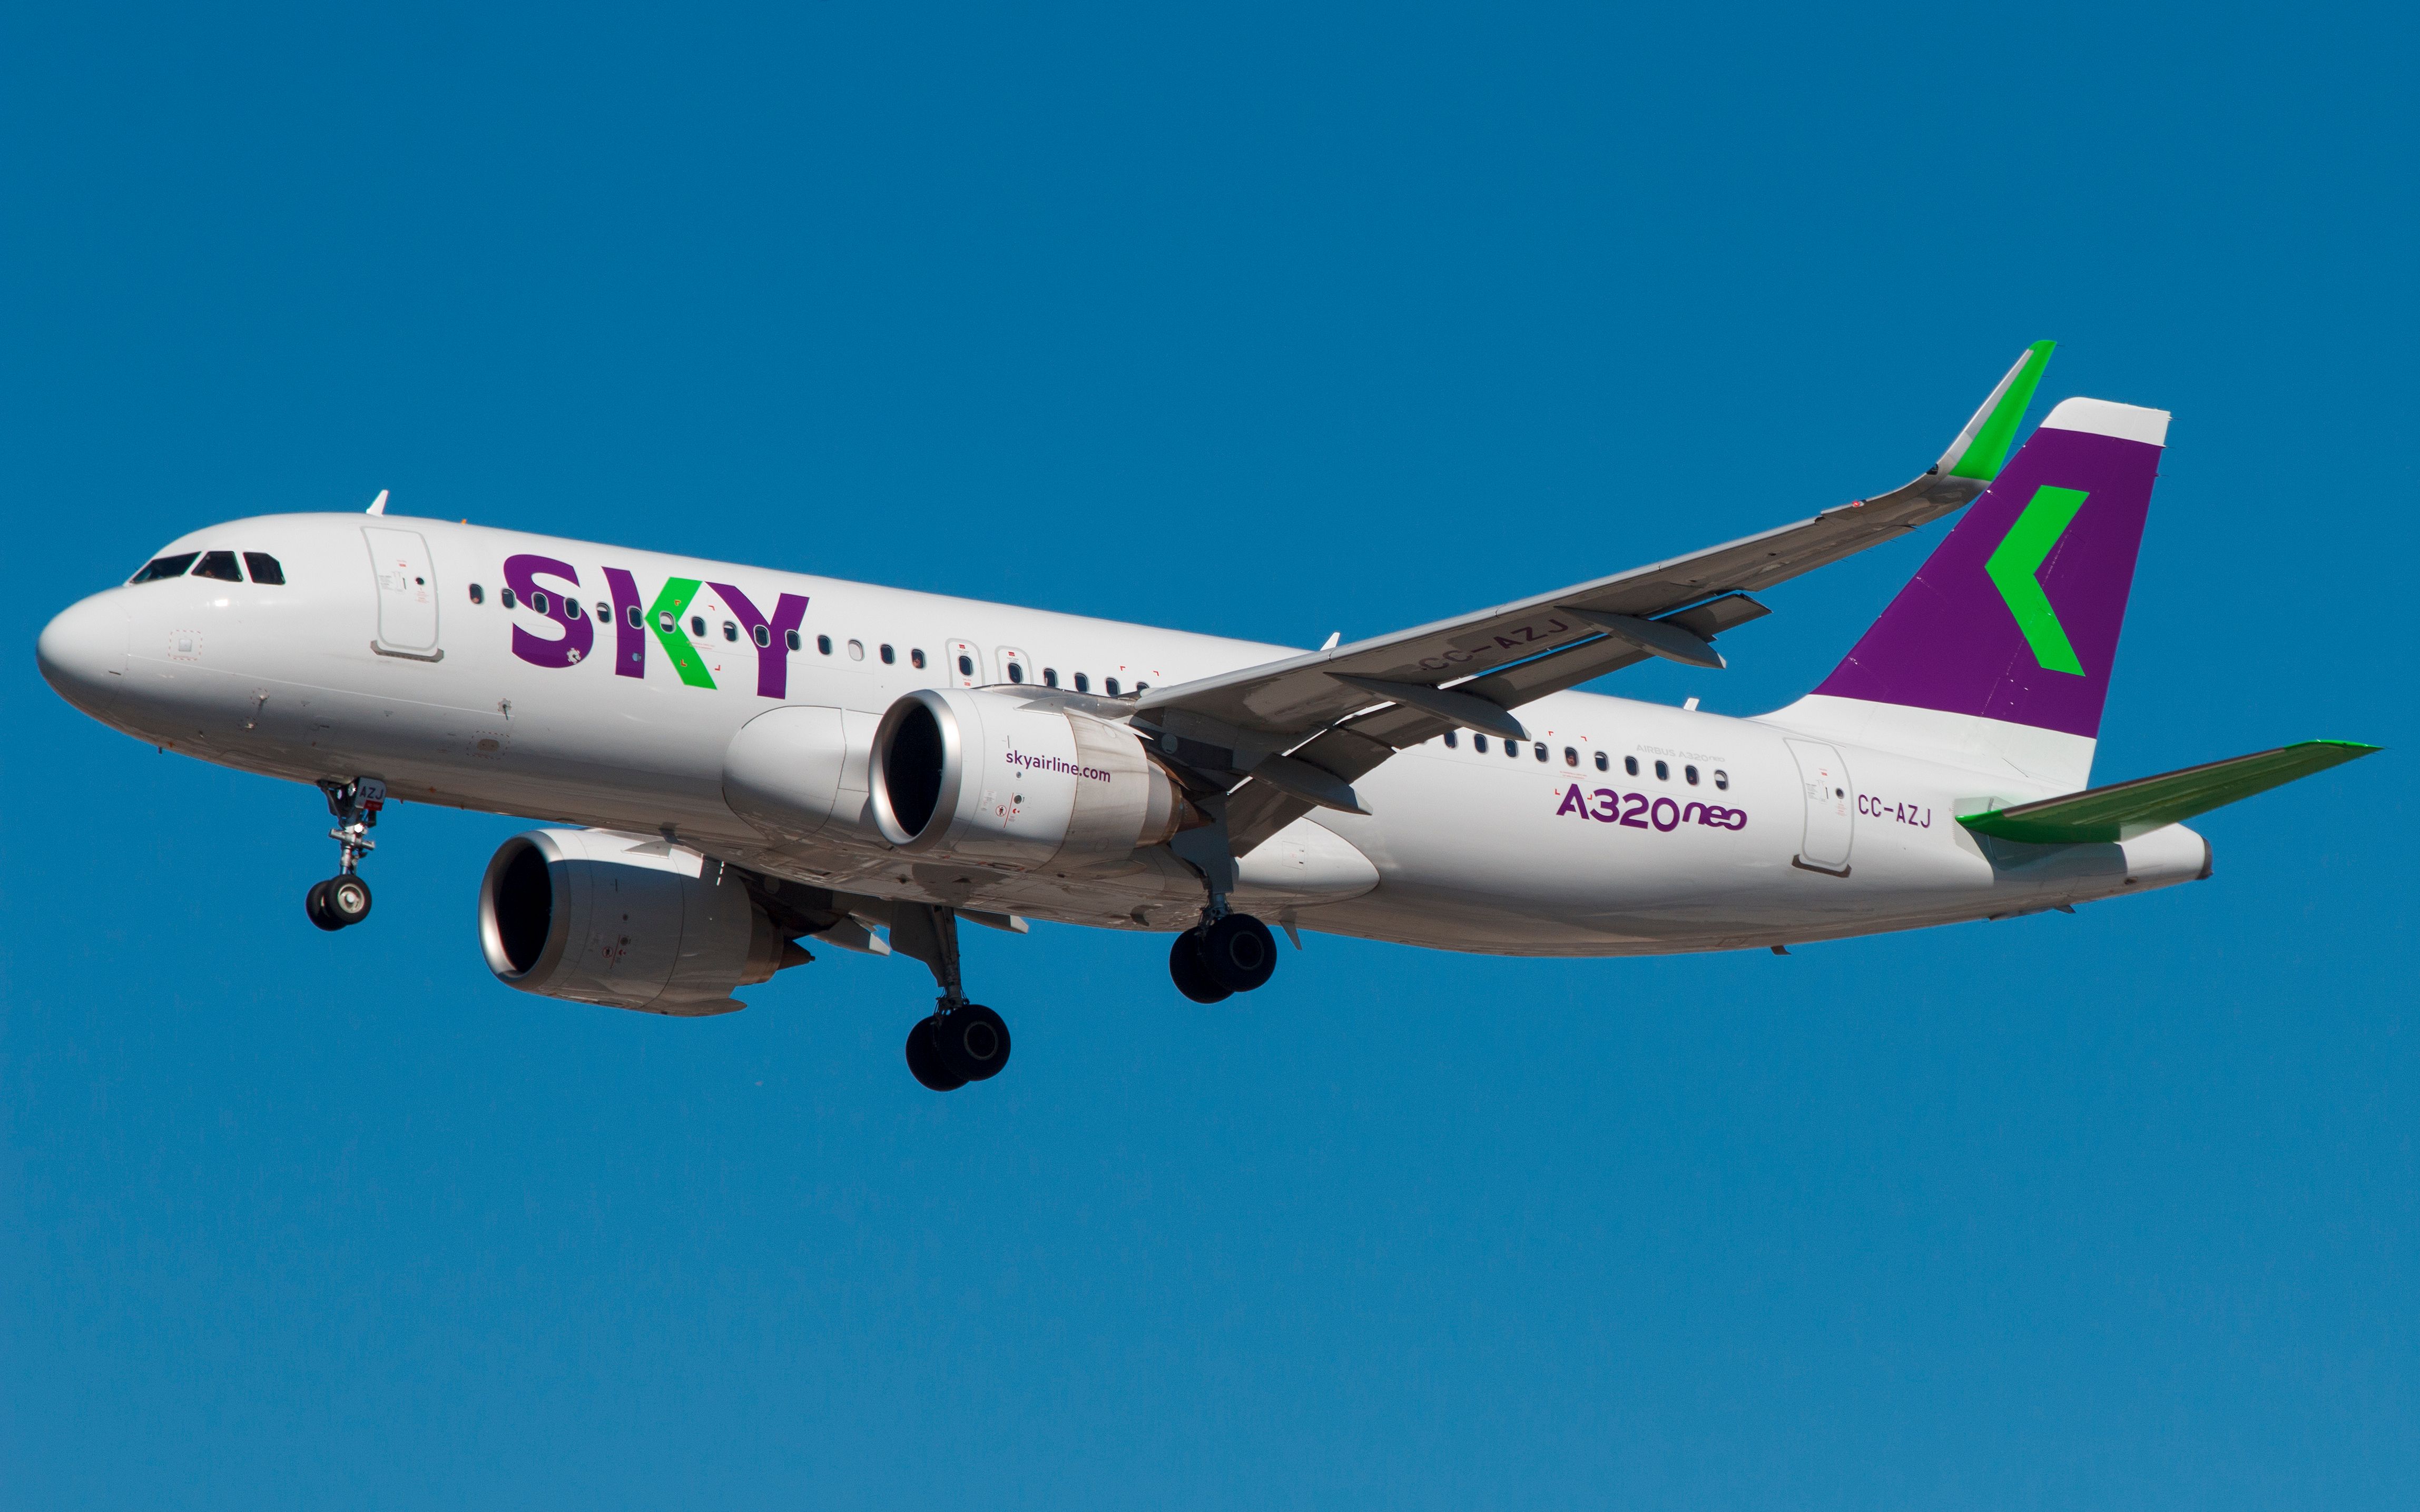 Sky Airlines Airbus A320neo aircraft landing in Guarulhos 